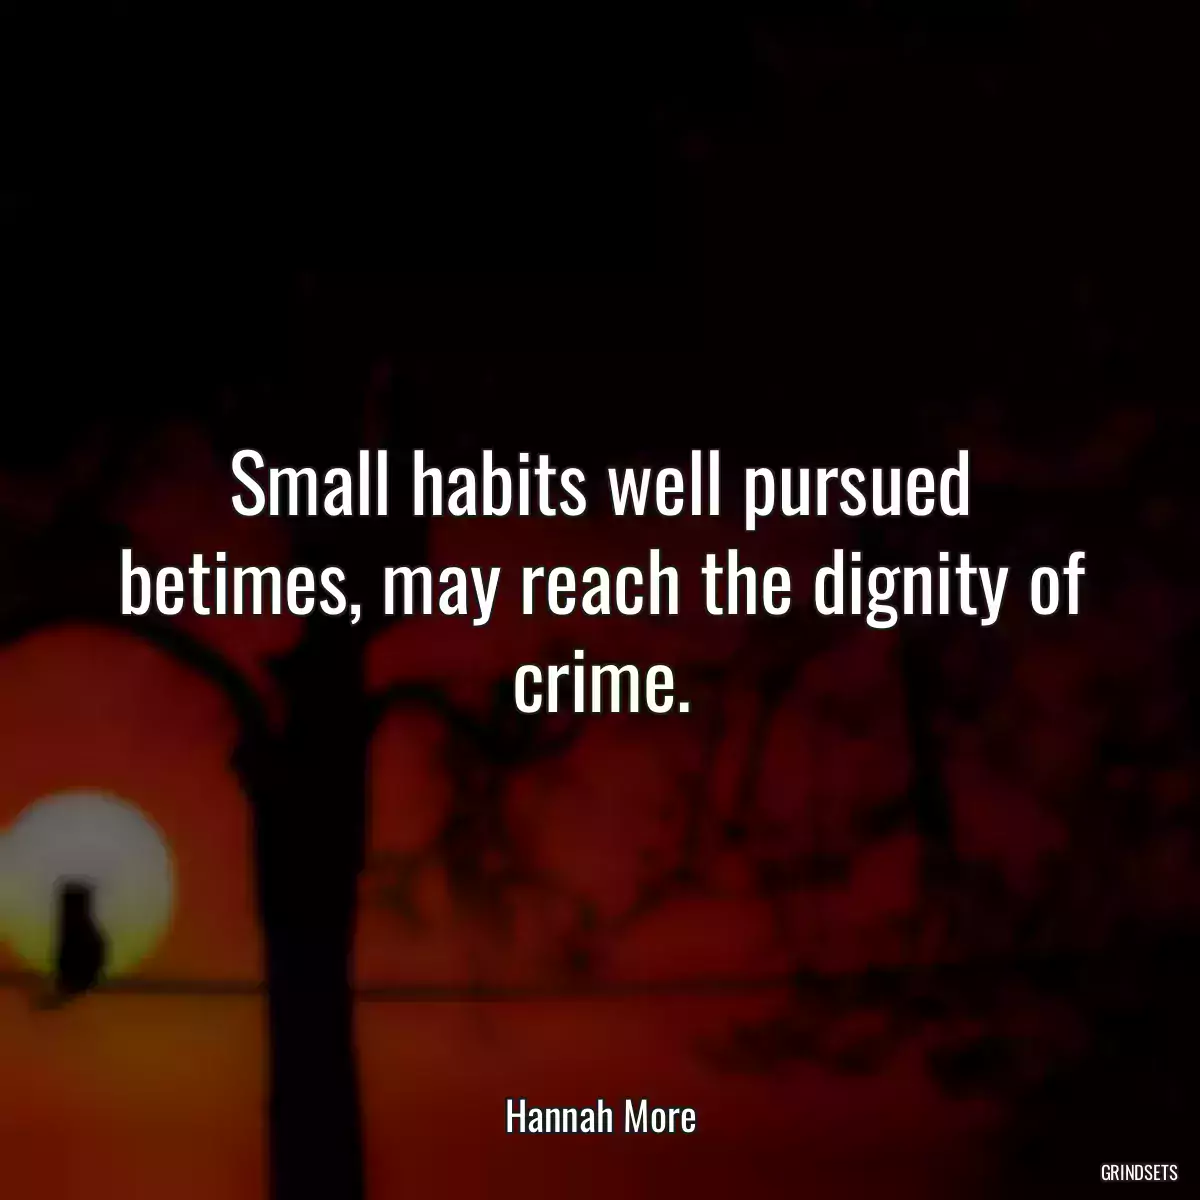 Small habits well pursued betimes, may reach the dignity of crime.